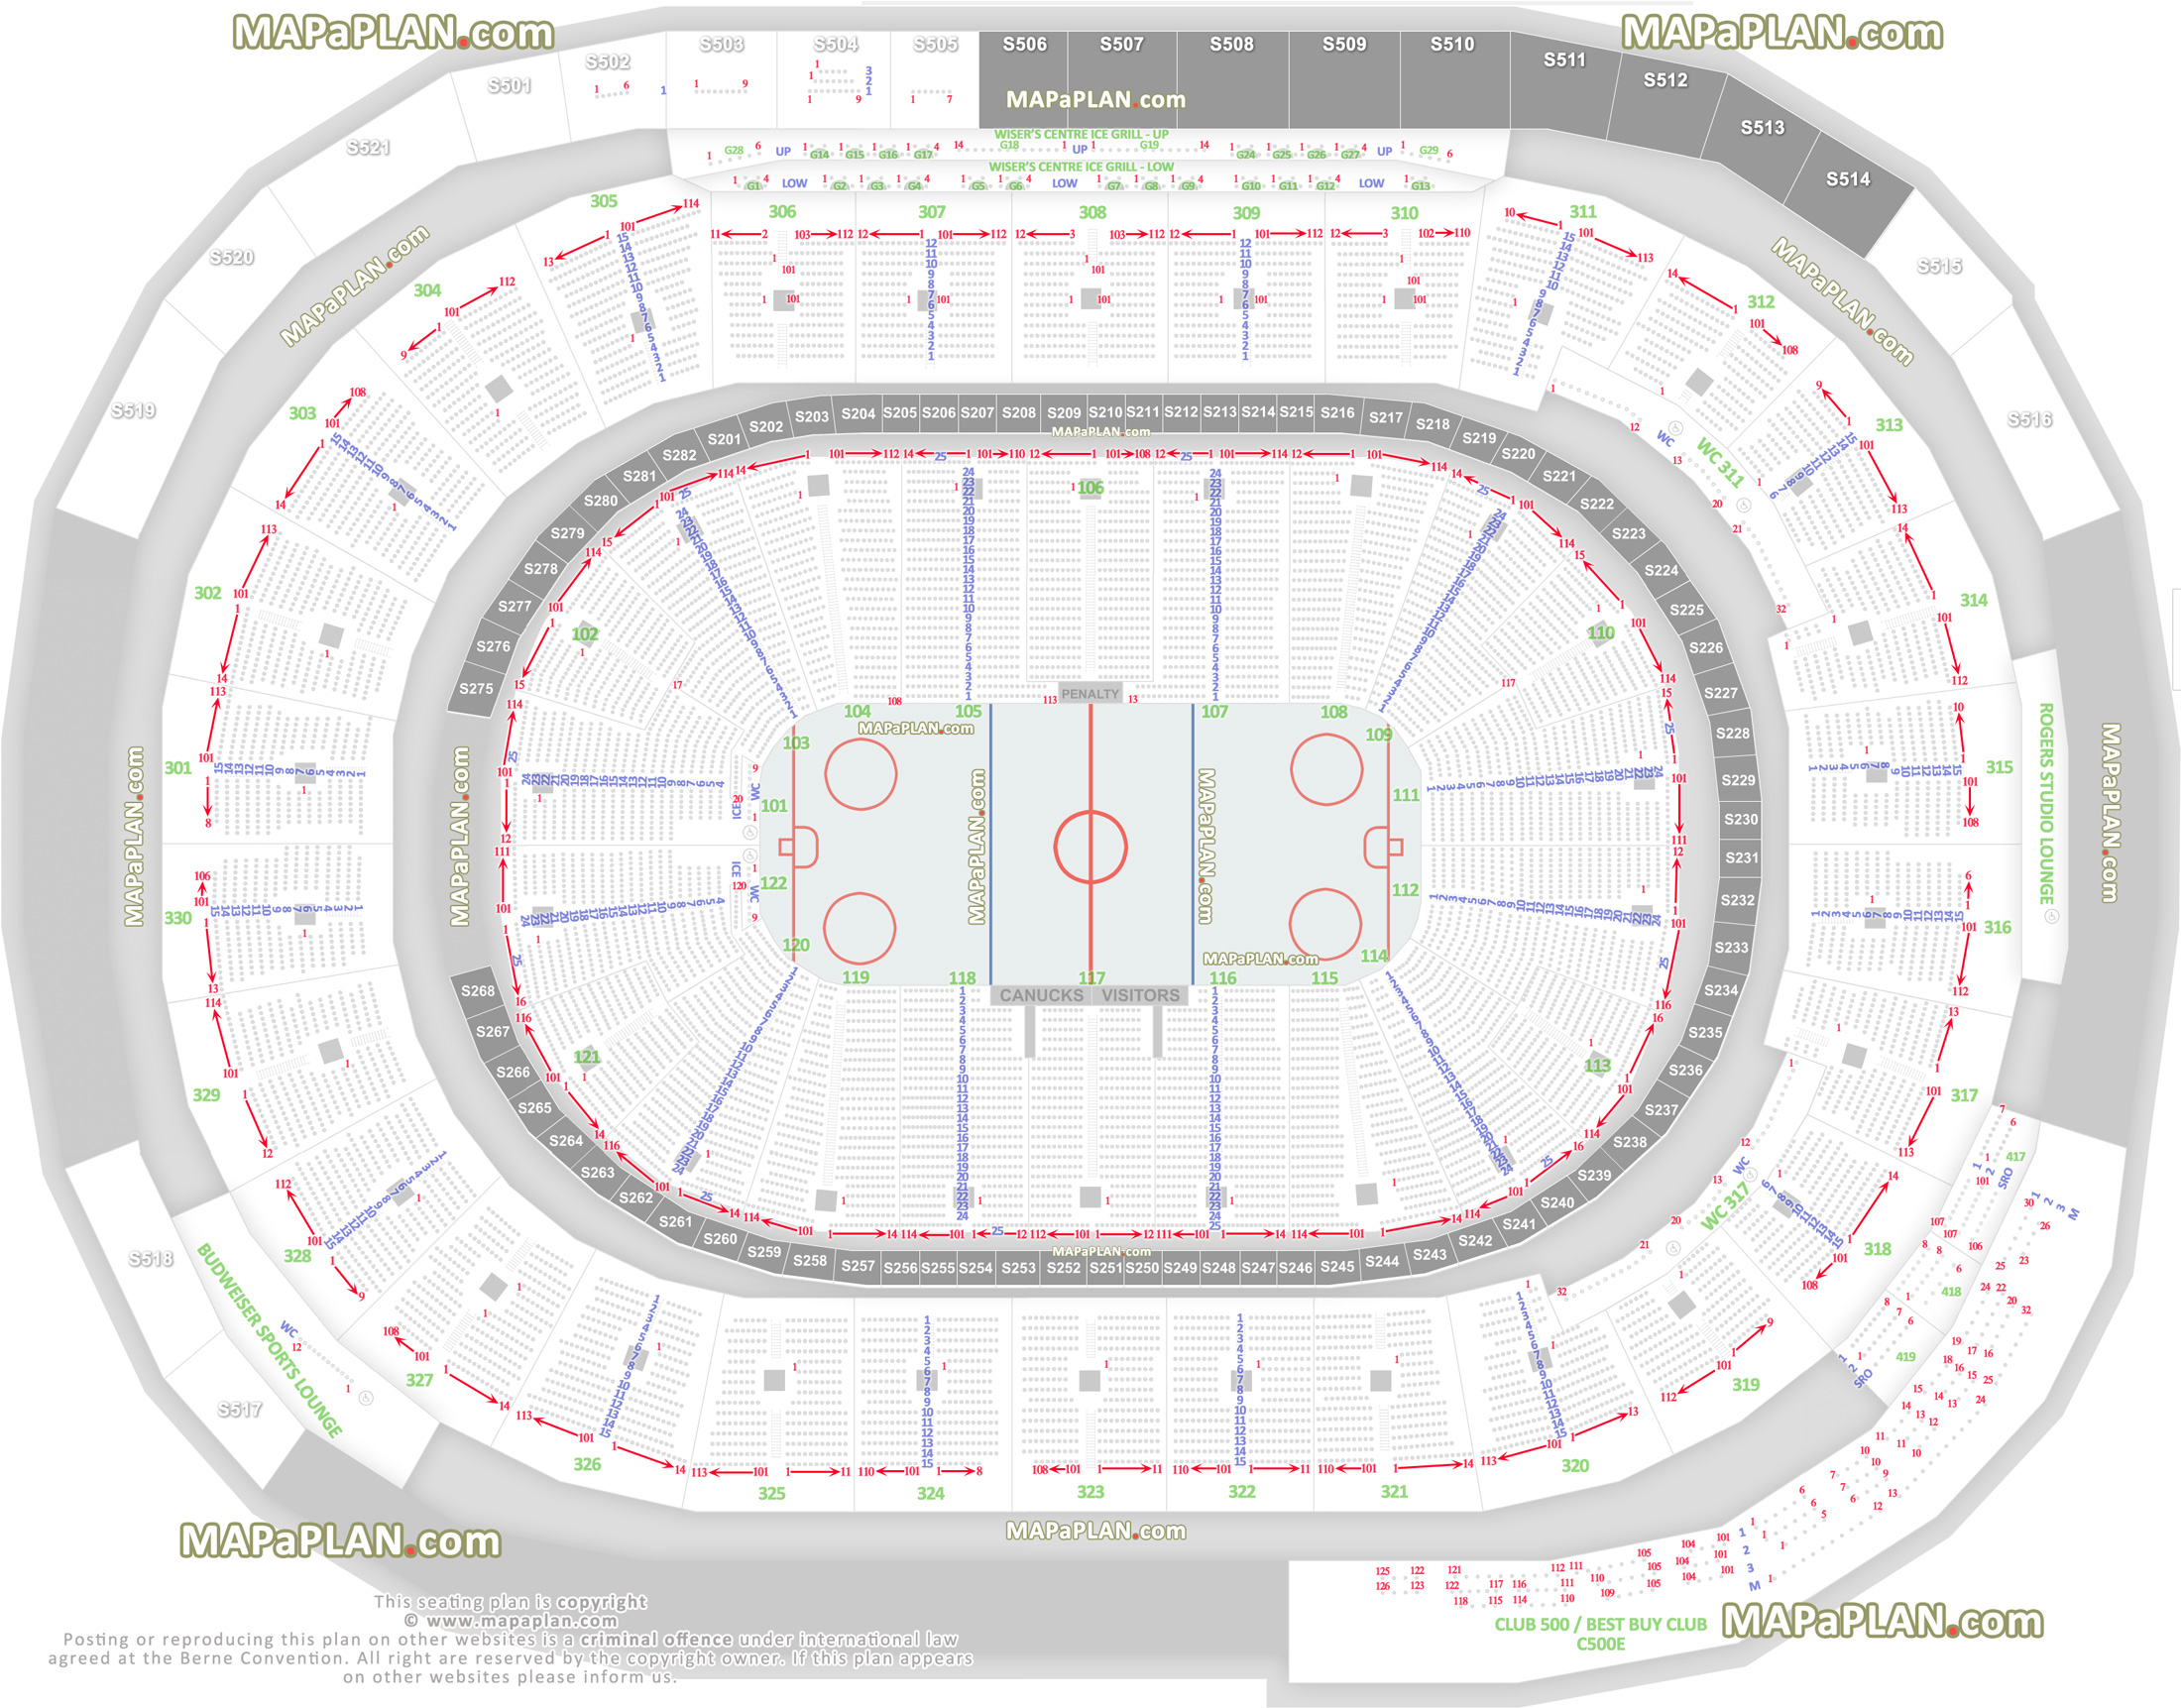 Vancouver Canucks Seating Chart